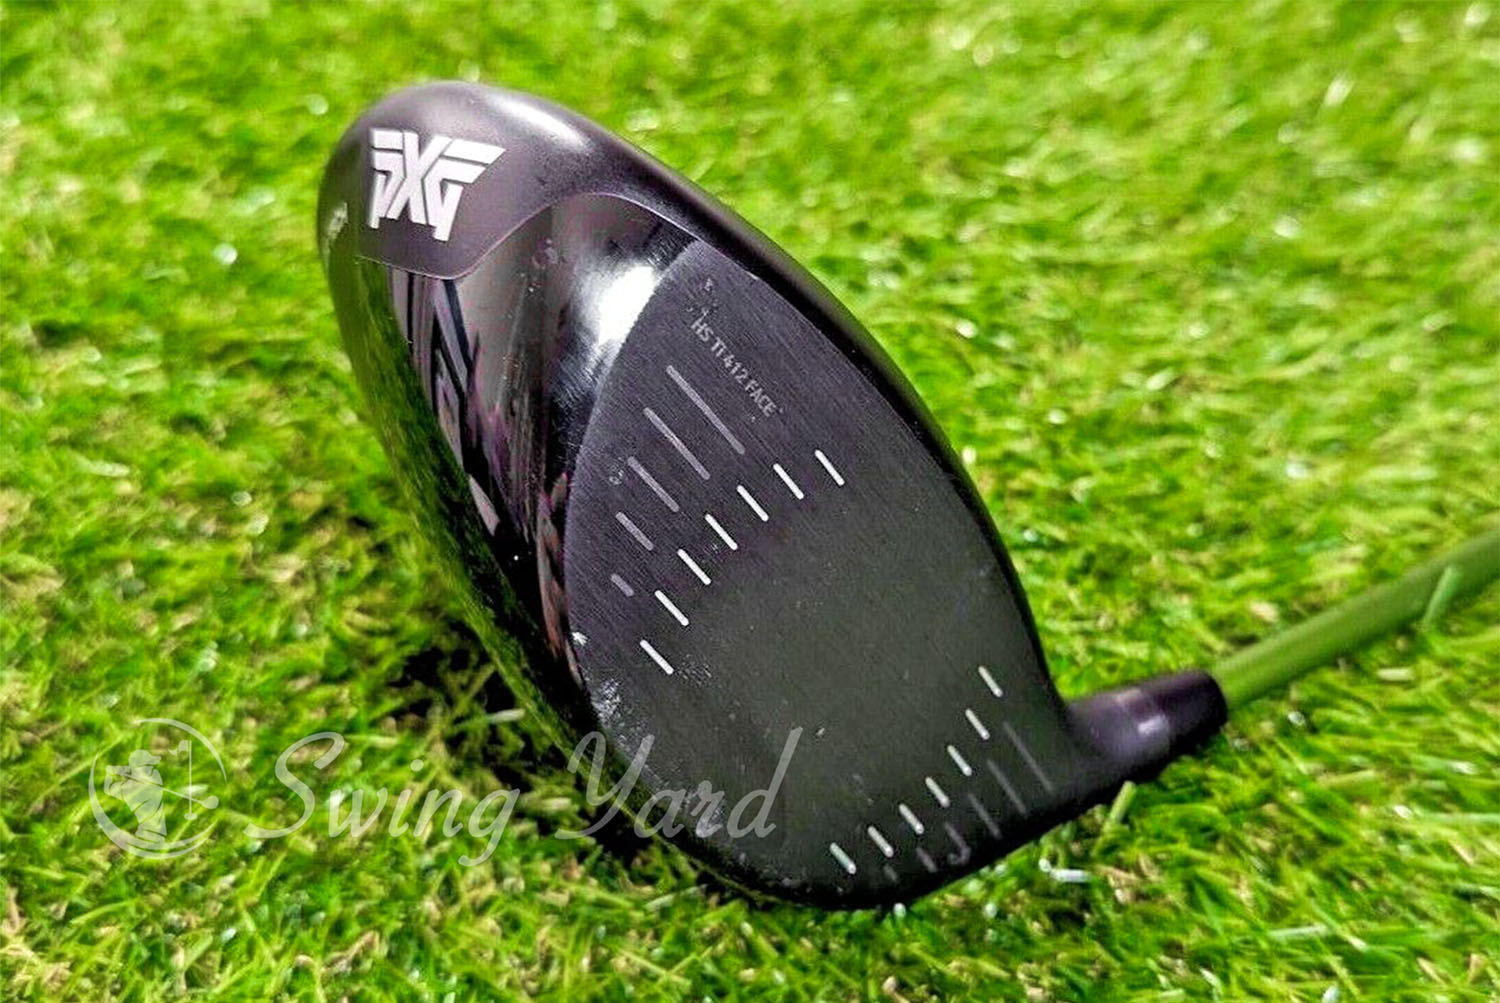 Photo of the PXG driver laying on turf